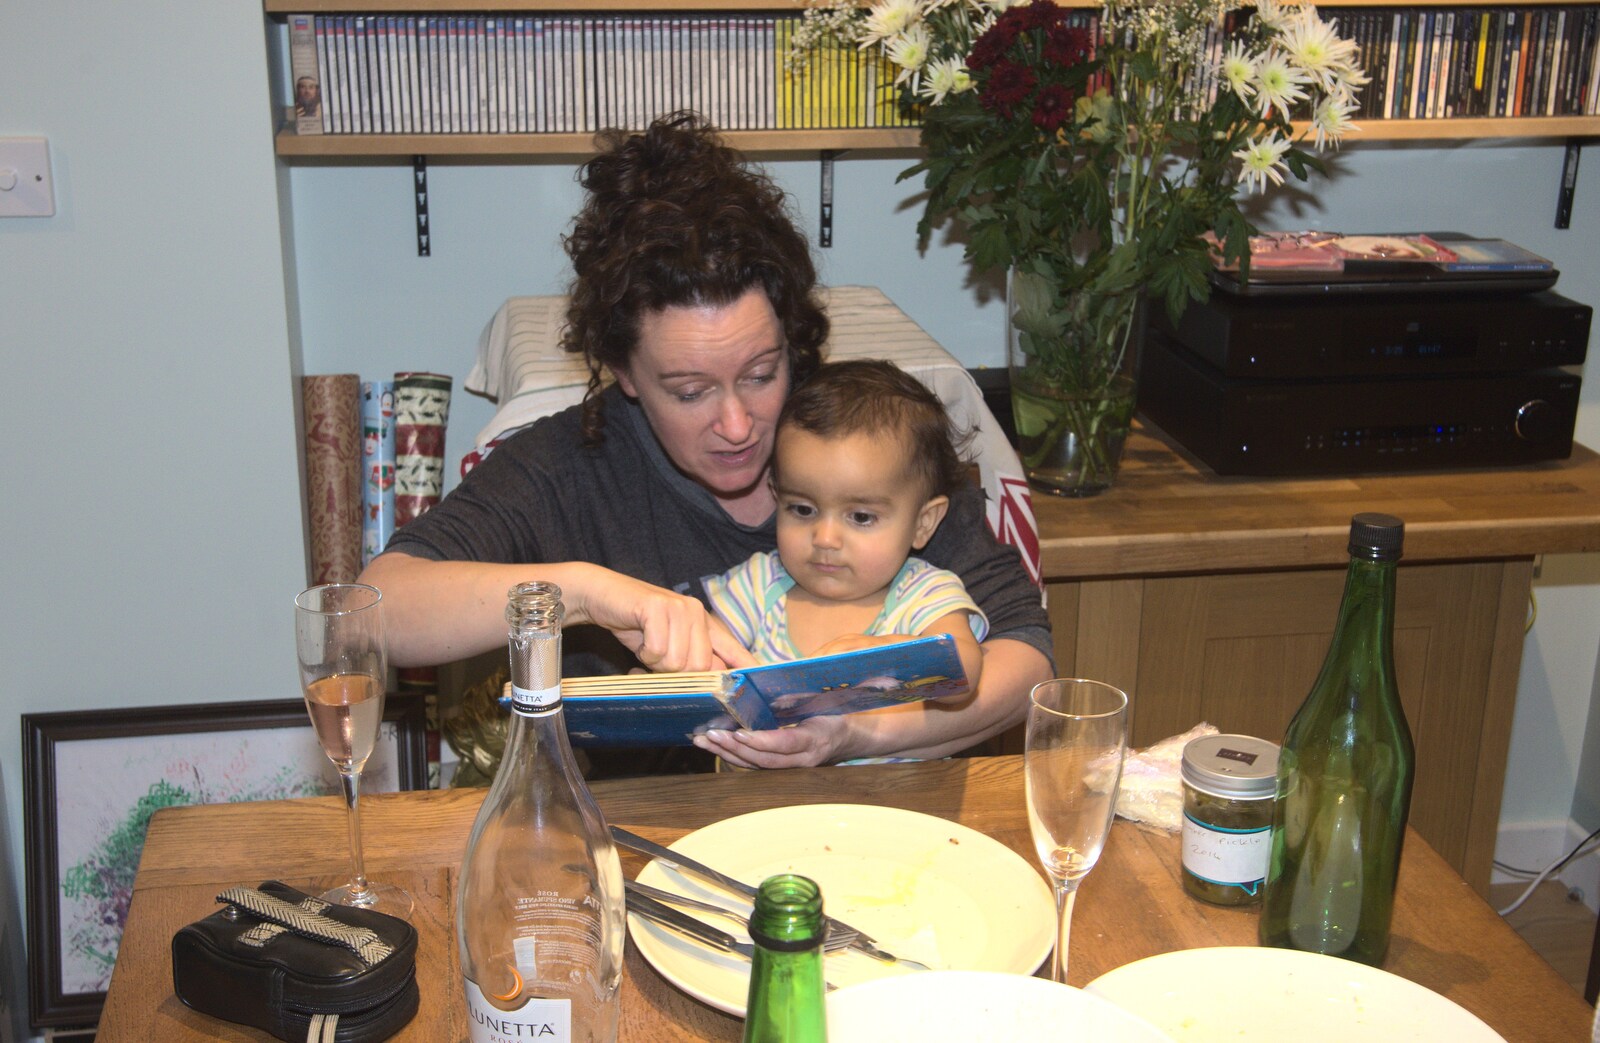 Evelyn reads to Nico from Christmas and All That, Brome, Suffolk - 25th December 2016